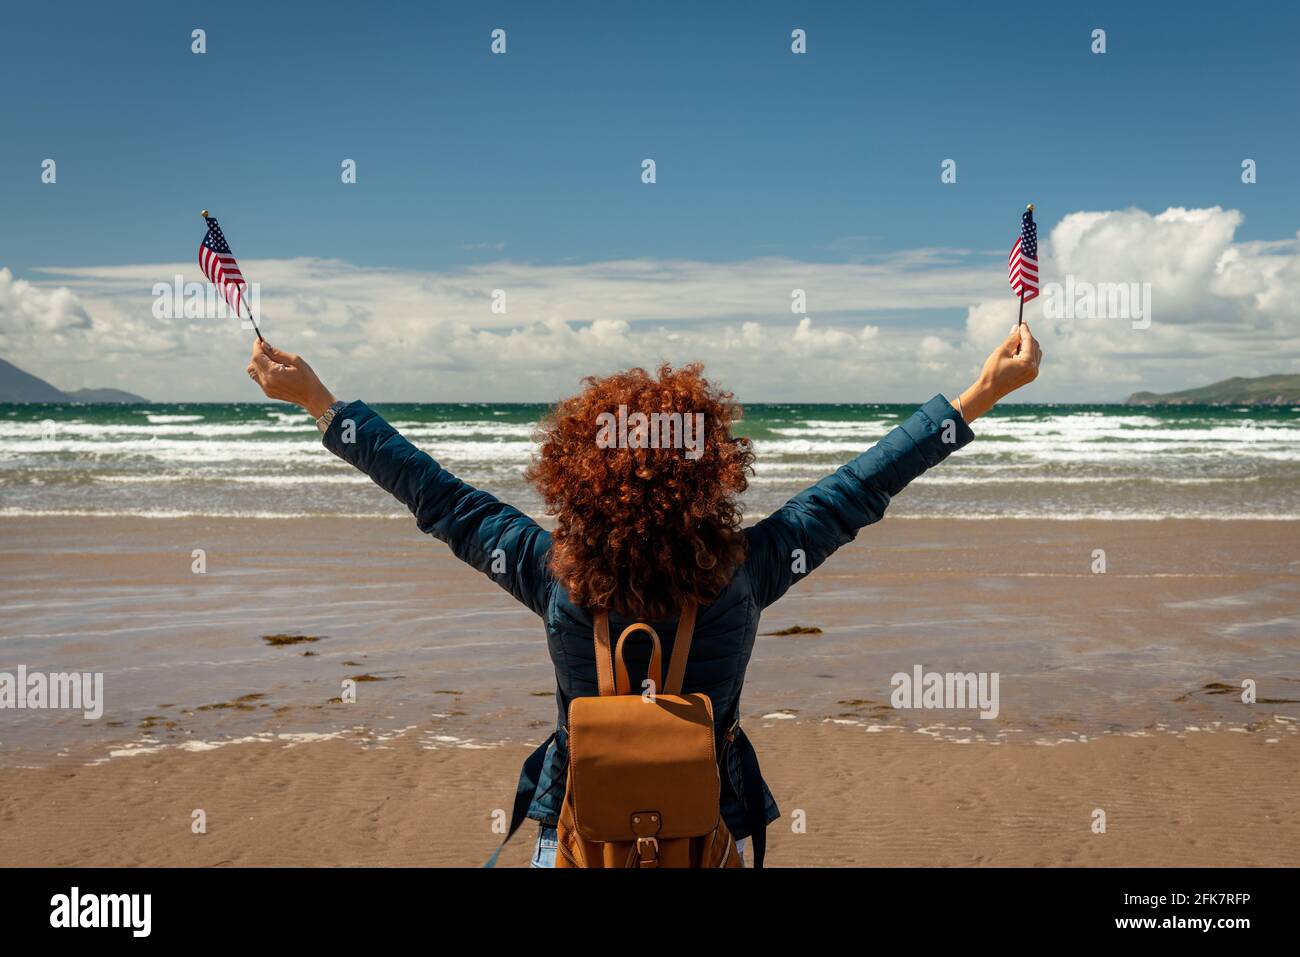 Rear view of young woman with red curly hair facing the sea while holding up American flags on a sandy beach on sunny day. Endless summer concept. Stock Photo